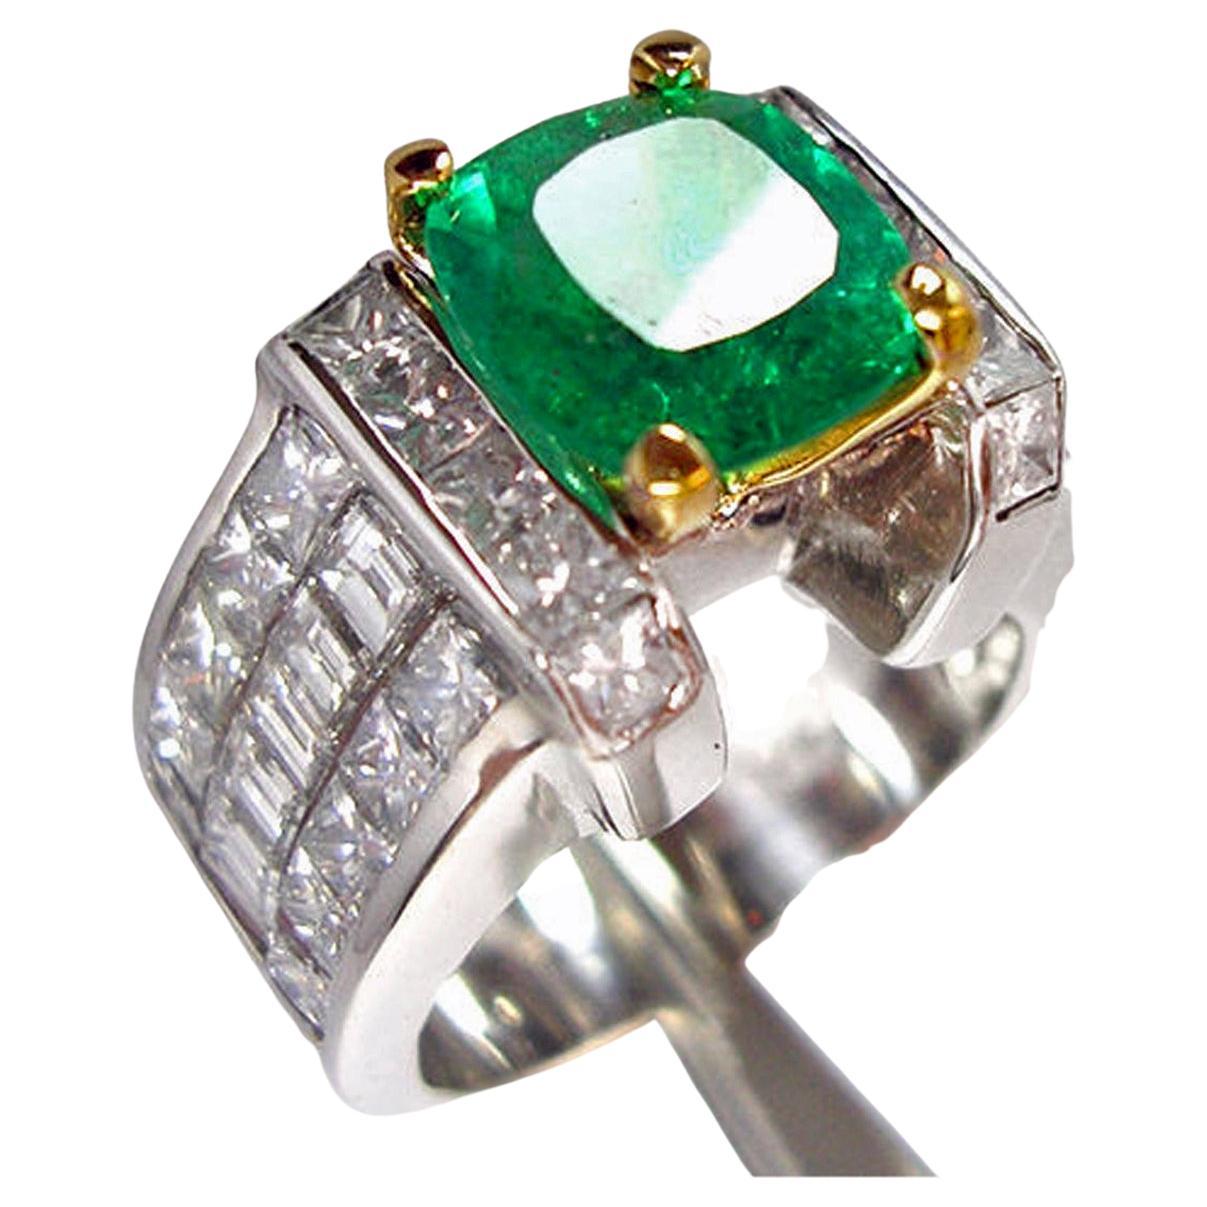 Stunning cocktail estate ring holding a Fine Natural Colombian Emerald and Diamonds, crafted in 18K Gold/ Unisex
Primary Stone: Fine Natural Colombian Emerald
Emerald Cut: Cushion Cut 
Emerald Weight: 2.65 Carats (1 emerald)
Measurements Emerald: